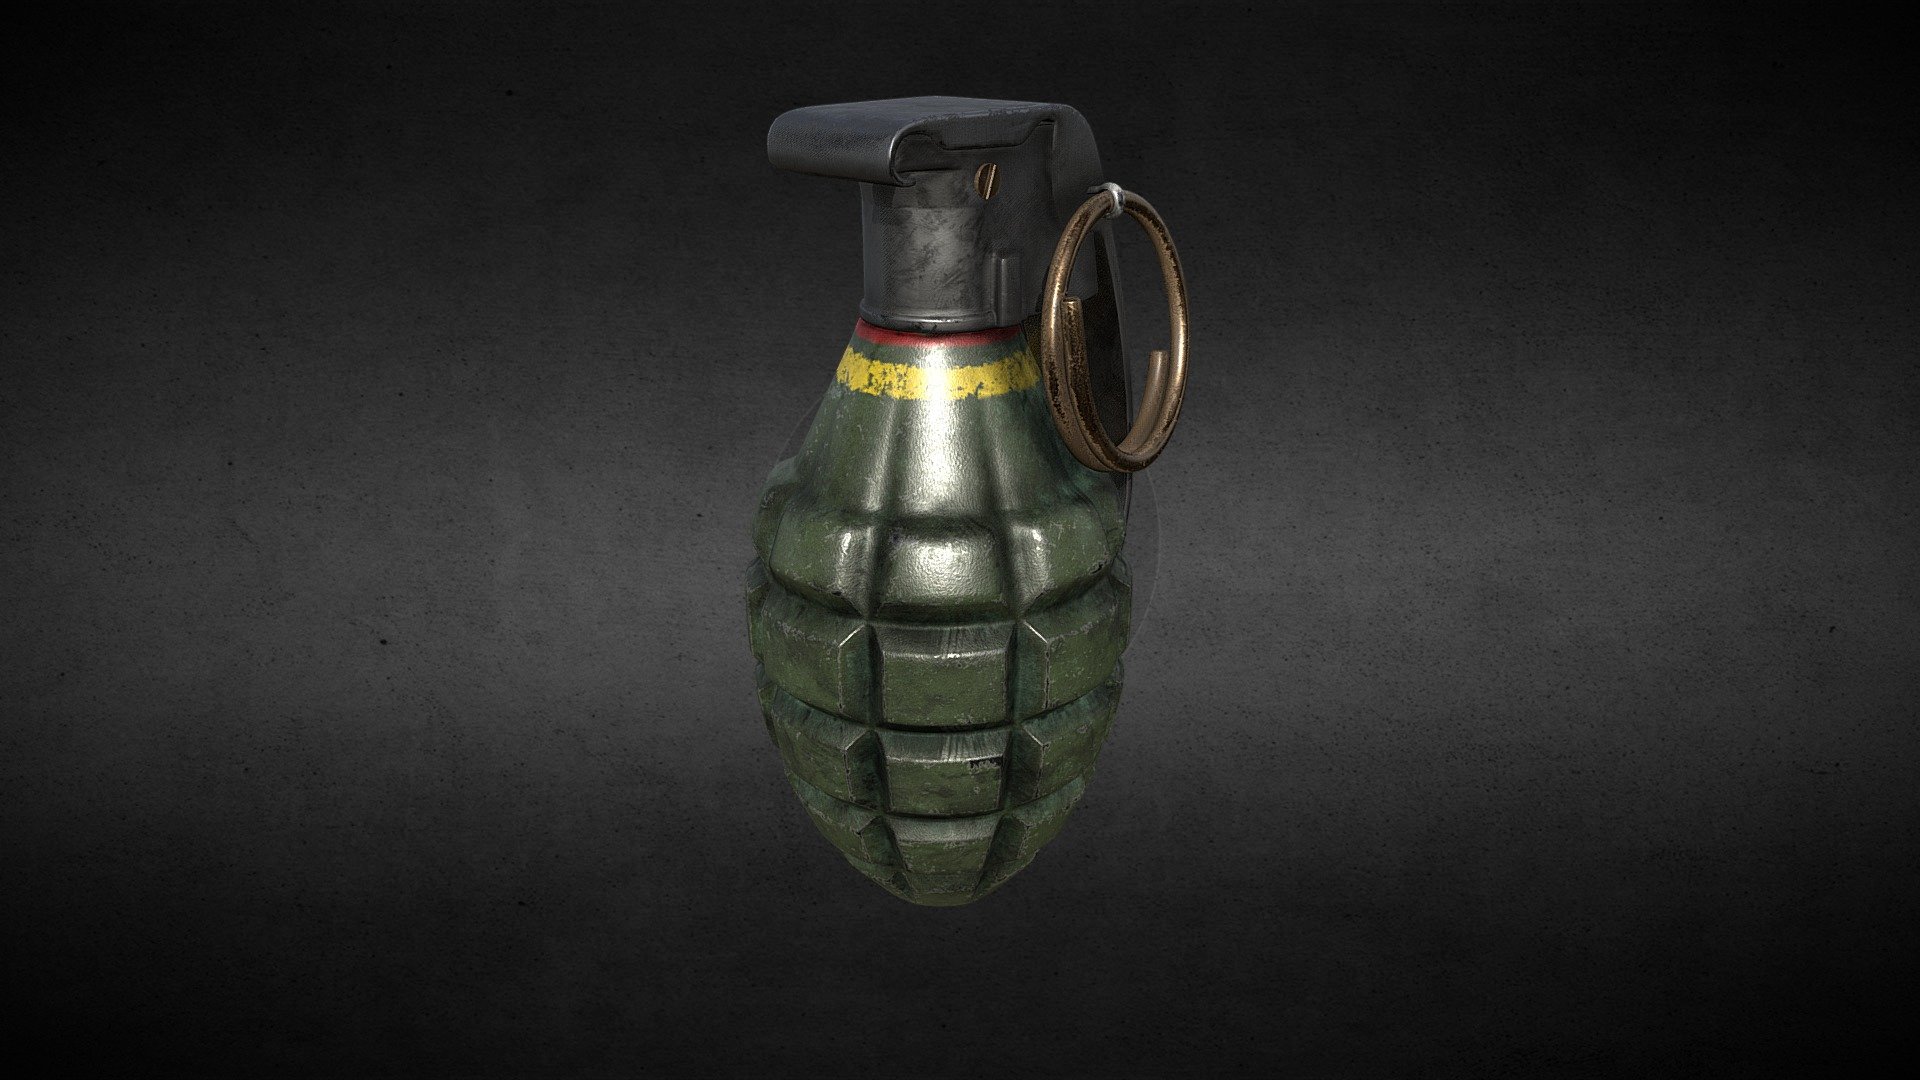 this is the MK 2 Grenade 3d model made within maya and textured in substance painter - The Mk 2 grenade (initially known as the Mk II) is a fragmentation type anti-personnel hand grenade introduced by the U.S. armed forces in 1918. It was the standard issue anti-personnel grenade used during World War II, and also saw limited service in later conflicts, including the Korean War and Vietnam War. Replacing the failed Mk 1 grenade of 1917, it was standardized in 1920 as the Mk II, and redesignated the Mk 2 on April 2, 1945.

PBR MATERIAL - 2048 X 2048 RESOLUTION

GAME READY 

PRODUCTION READY

my rookies' profile: https://www.therookies.co/u/AshwinashokIN/

my Instagram: https://www.instagram.com/aashwin_/

my LinkedIn: https://www.linkedin.com/in/ashwinashok1822/

my youtube: https://www.youtube.com/channel/UCRAM5Y-DoER4Og2z_fJFi2Q - grenade MK-2 - Buy Royalty Free 3D model by ASHWIN ASHOK (@ASHWINASHOK1822) 3d model